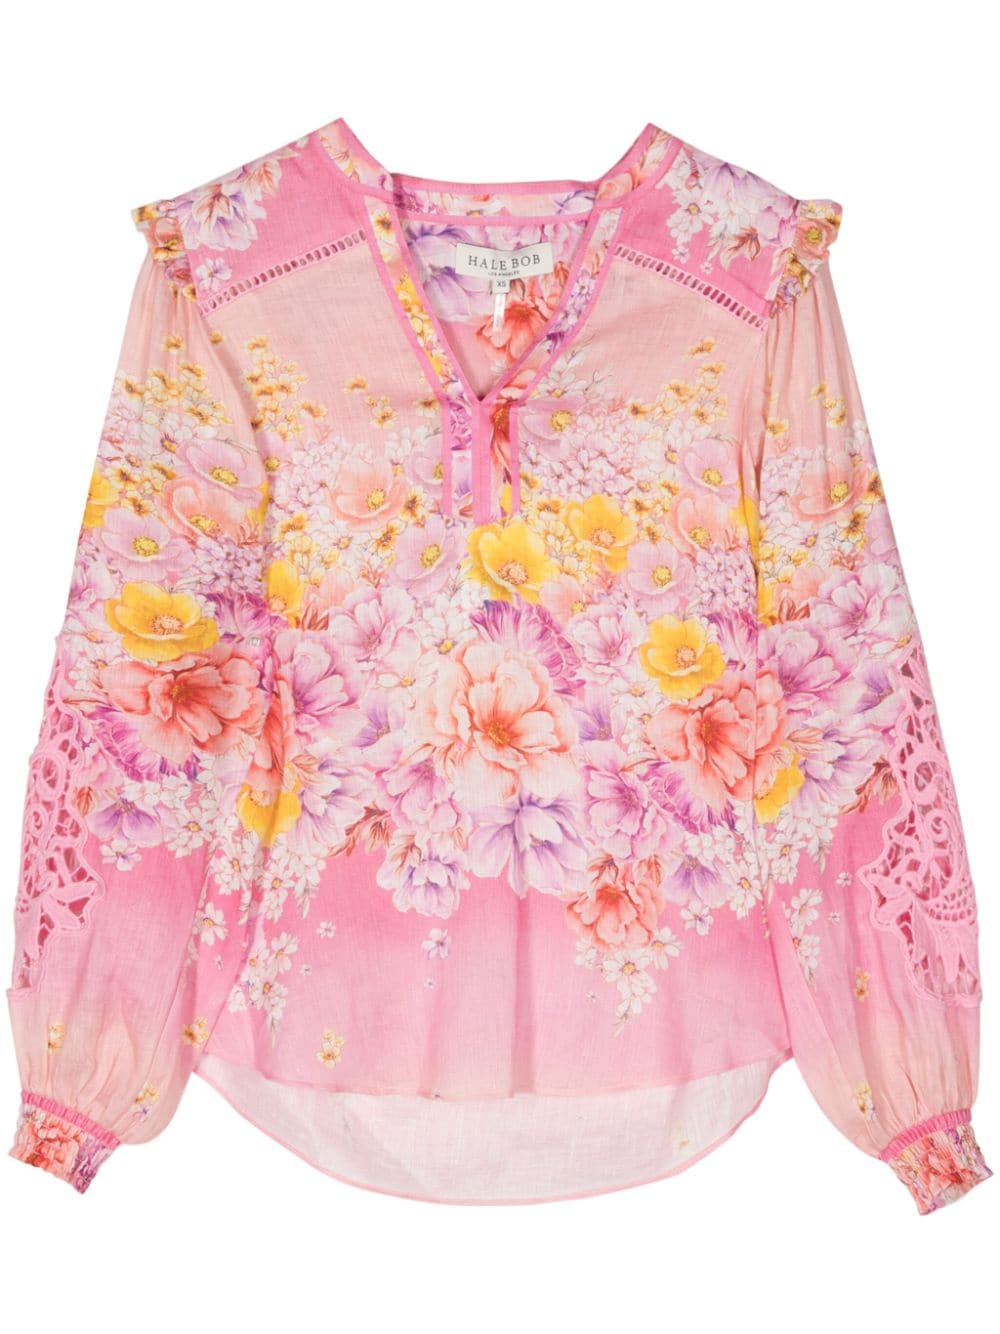 Hale Bob Floral-print Ruffle-detail Blouse In Pink